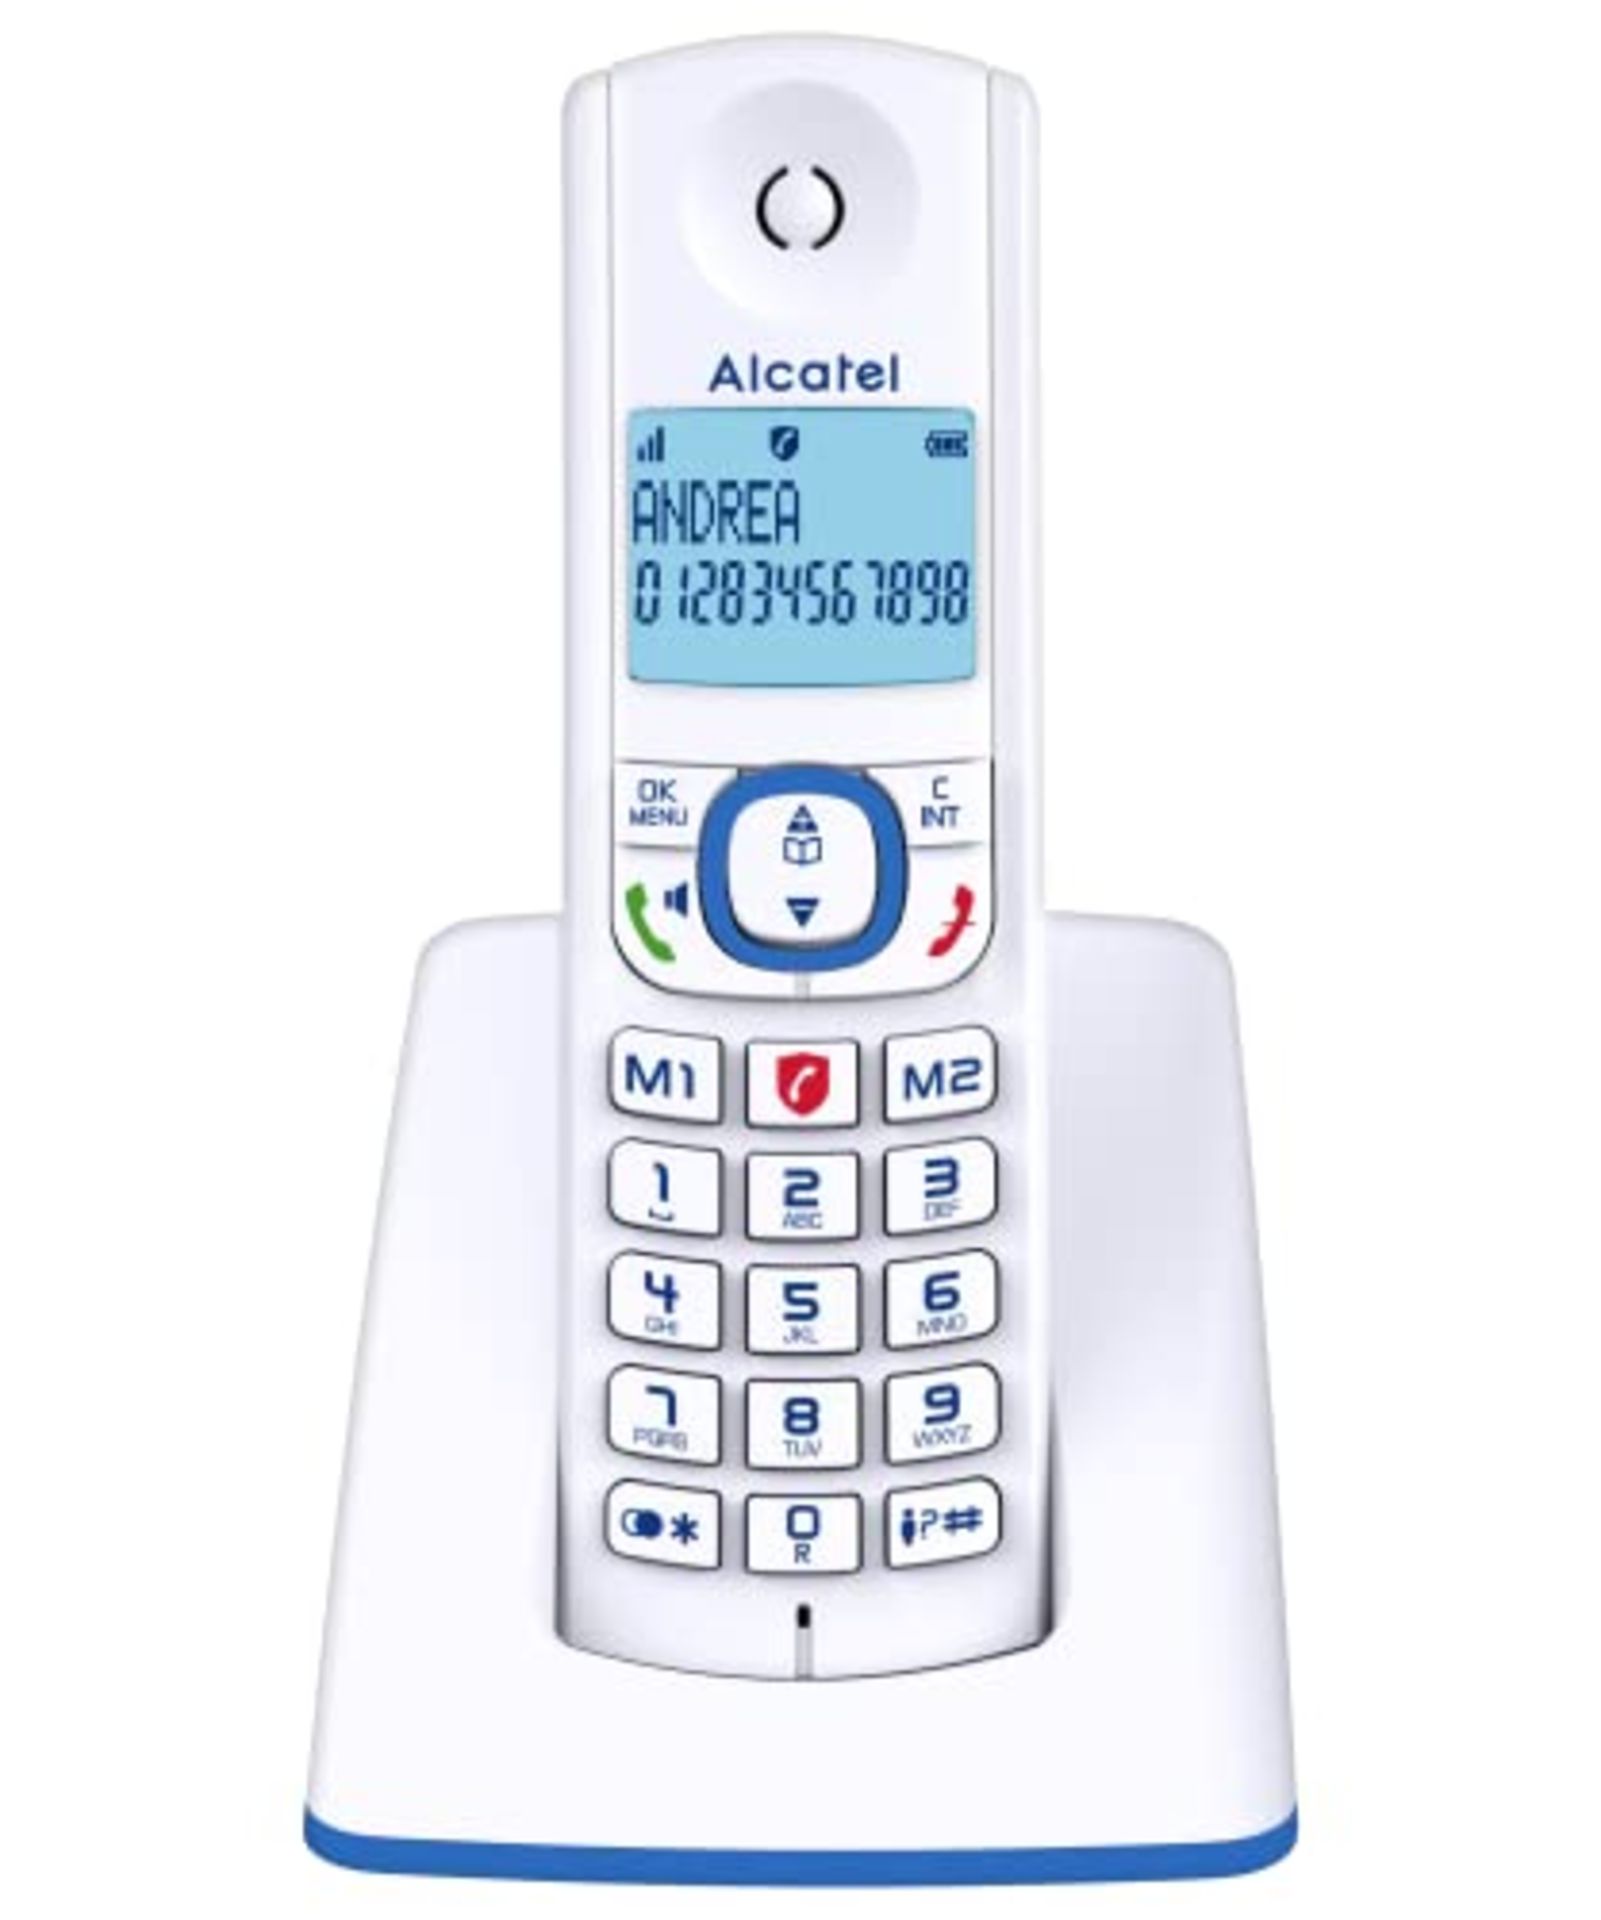 Alcatel F530, cordless phone, with call blocking function, hands-free and two direct m